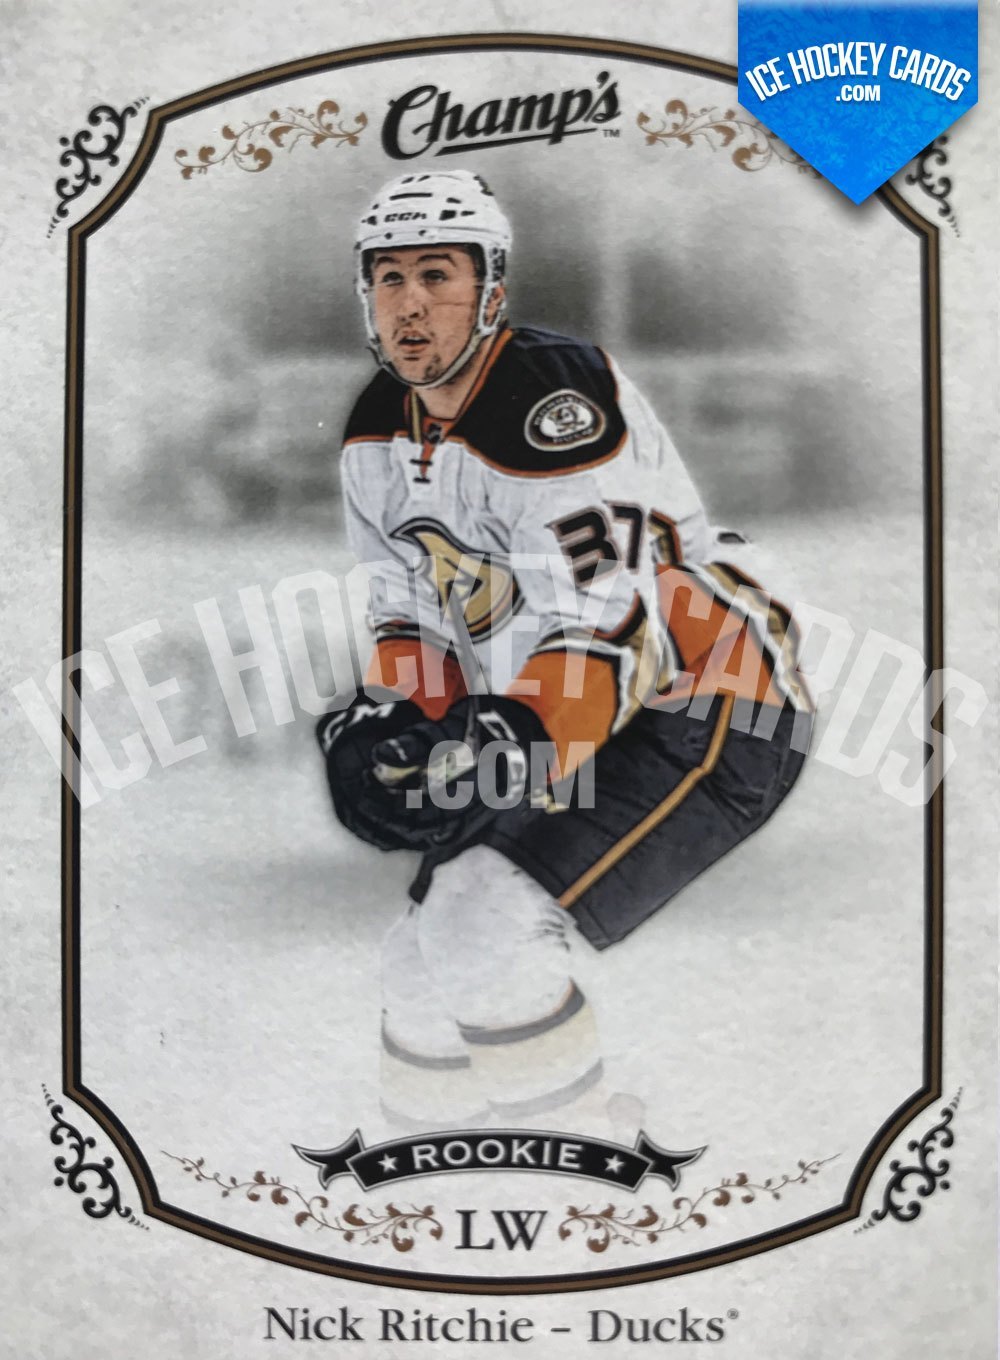 Upper Deck - Champs 15-16 - Nick Ritchie Rookie Card